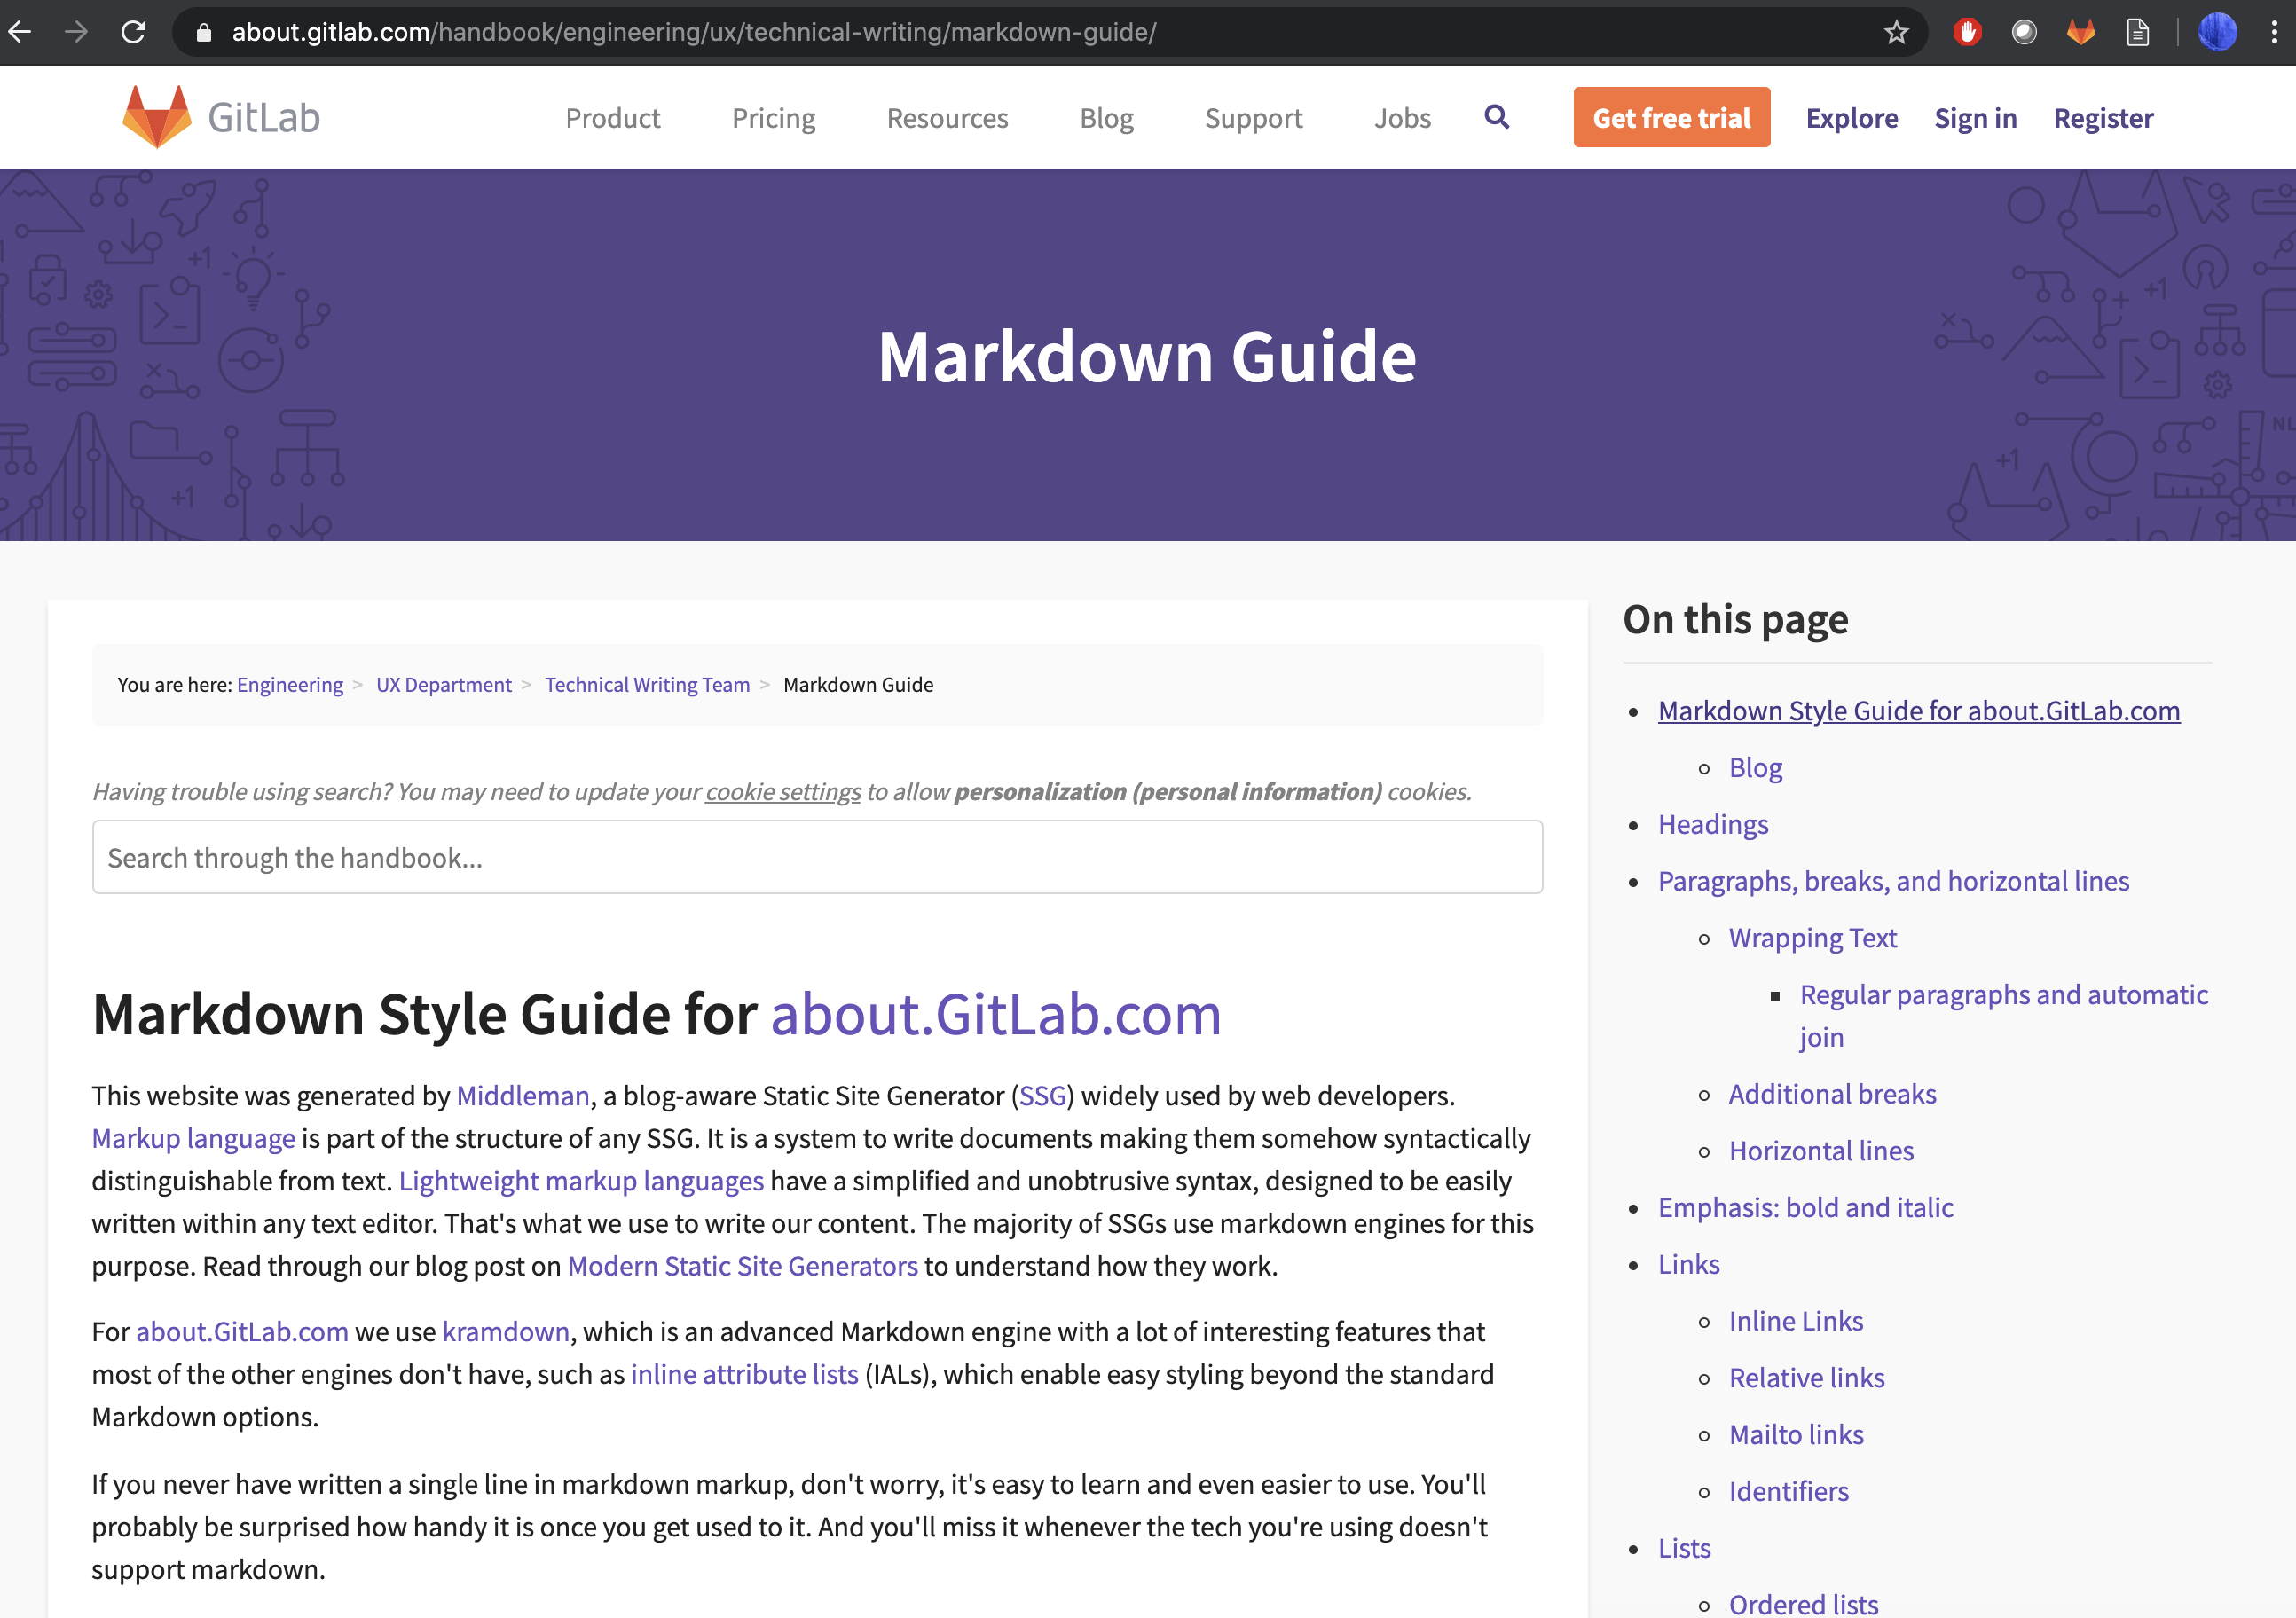 Getting familiar with Markdown